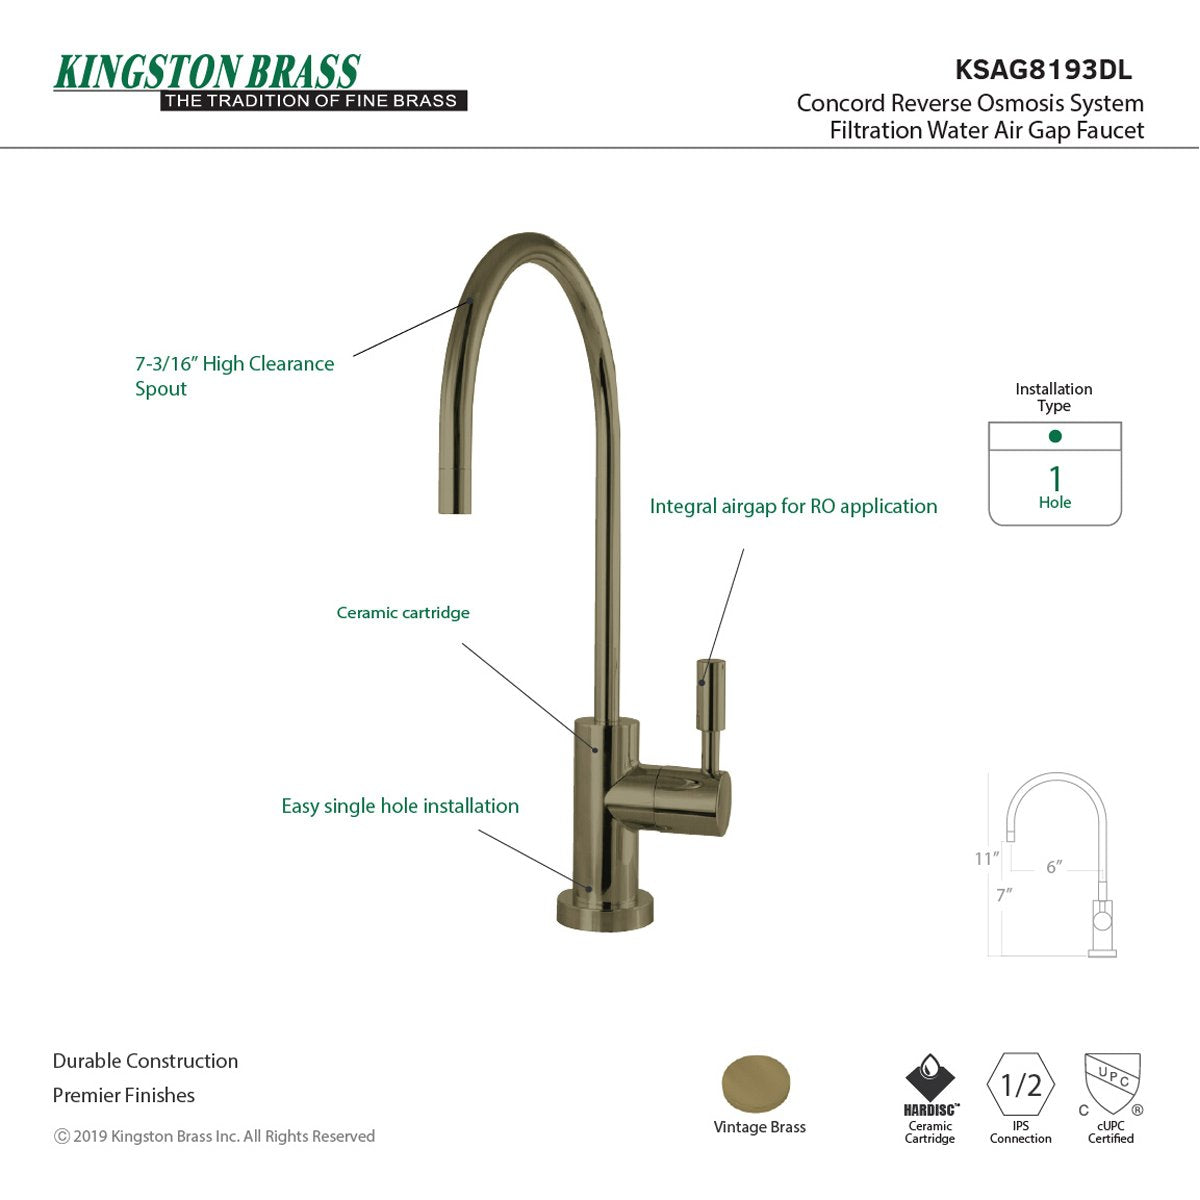 Kingston Brass Concord Reverse Osmosis System Filtration Water Air Gap Faucet